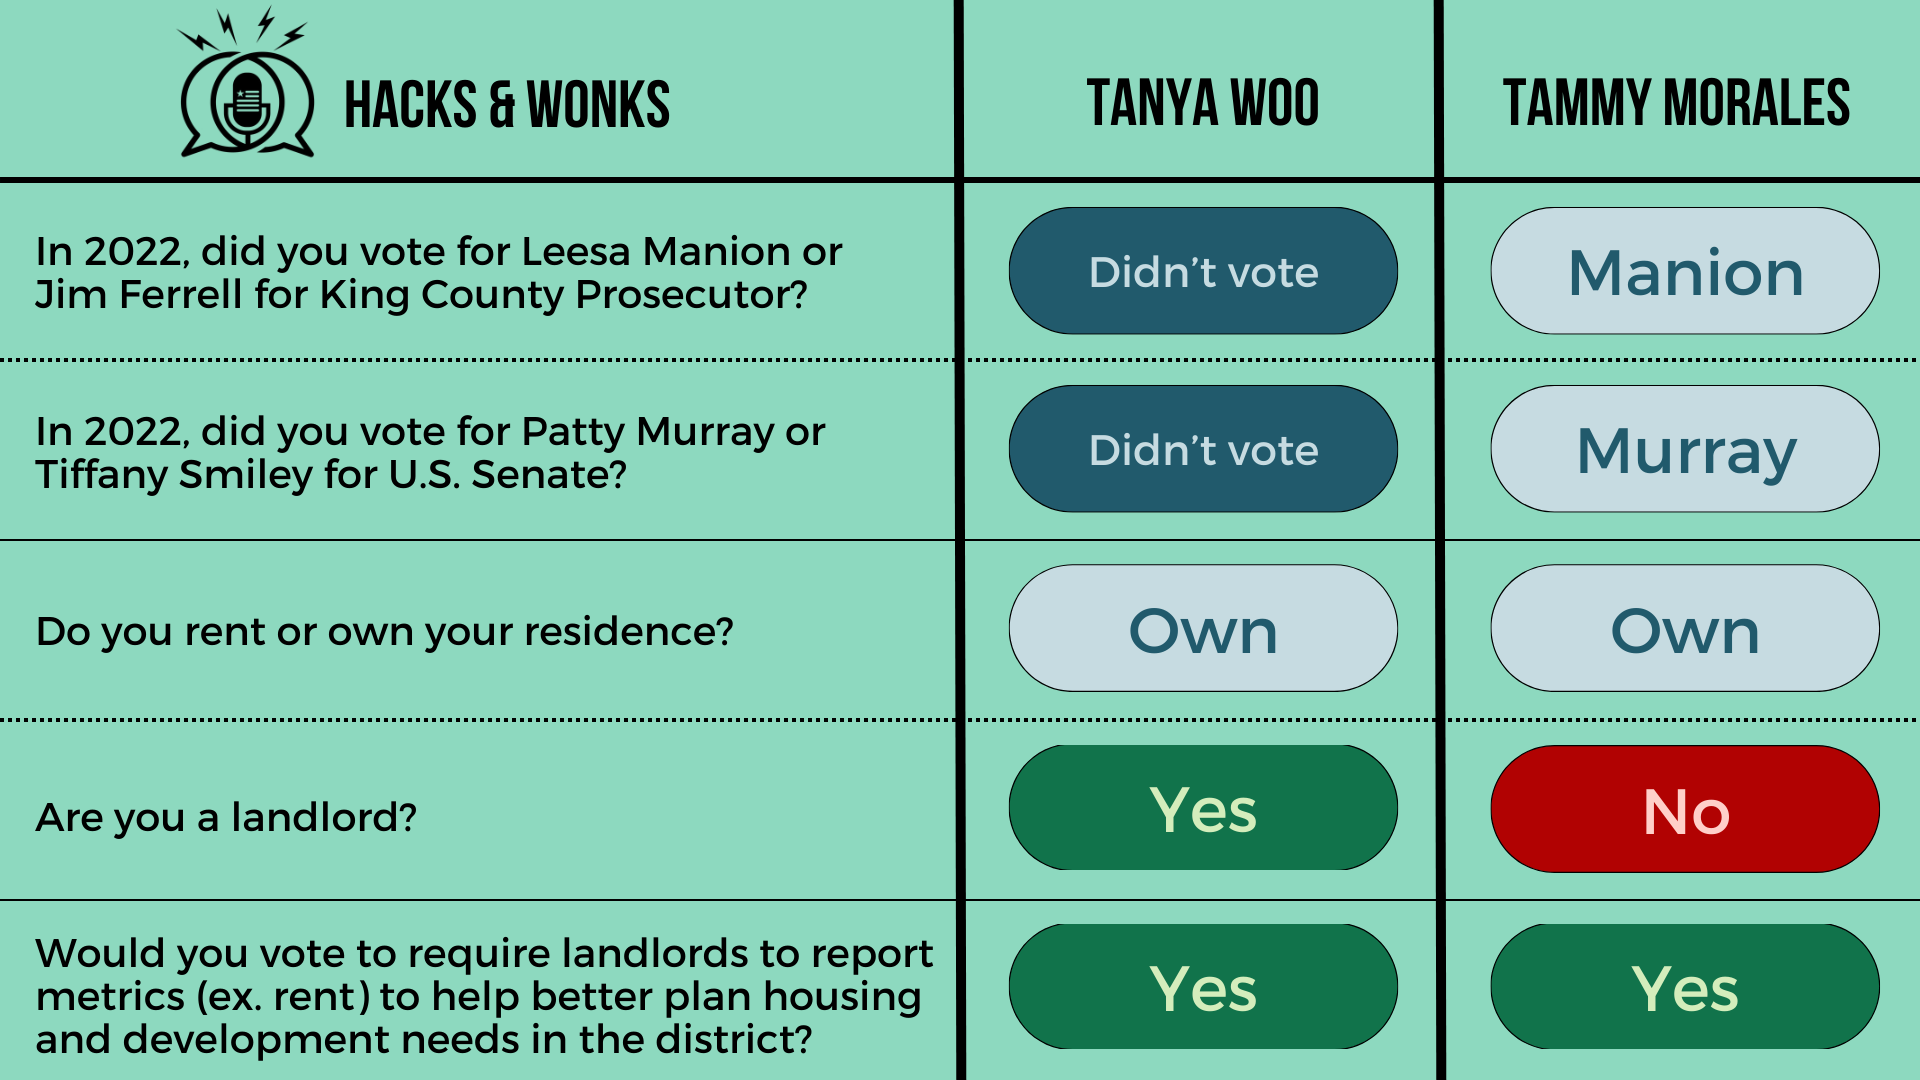 Q: In 2022, did you vote for Leesa Manion or Jim Ferrell for King County Prosecutor? Tanya Woo: Didn’t vote, Tammy Morales: Manion  Q: In 2022, did you vote for Patty Murray or Tiffany Smiley for U.S. Senate? Tanya Woo: Didn’t vote, Tammy Morales: Mu